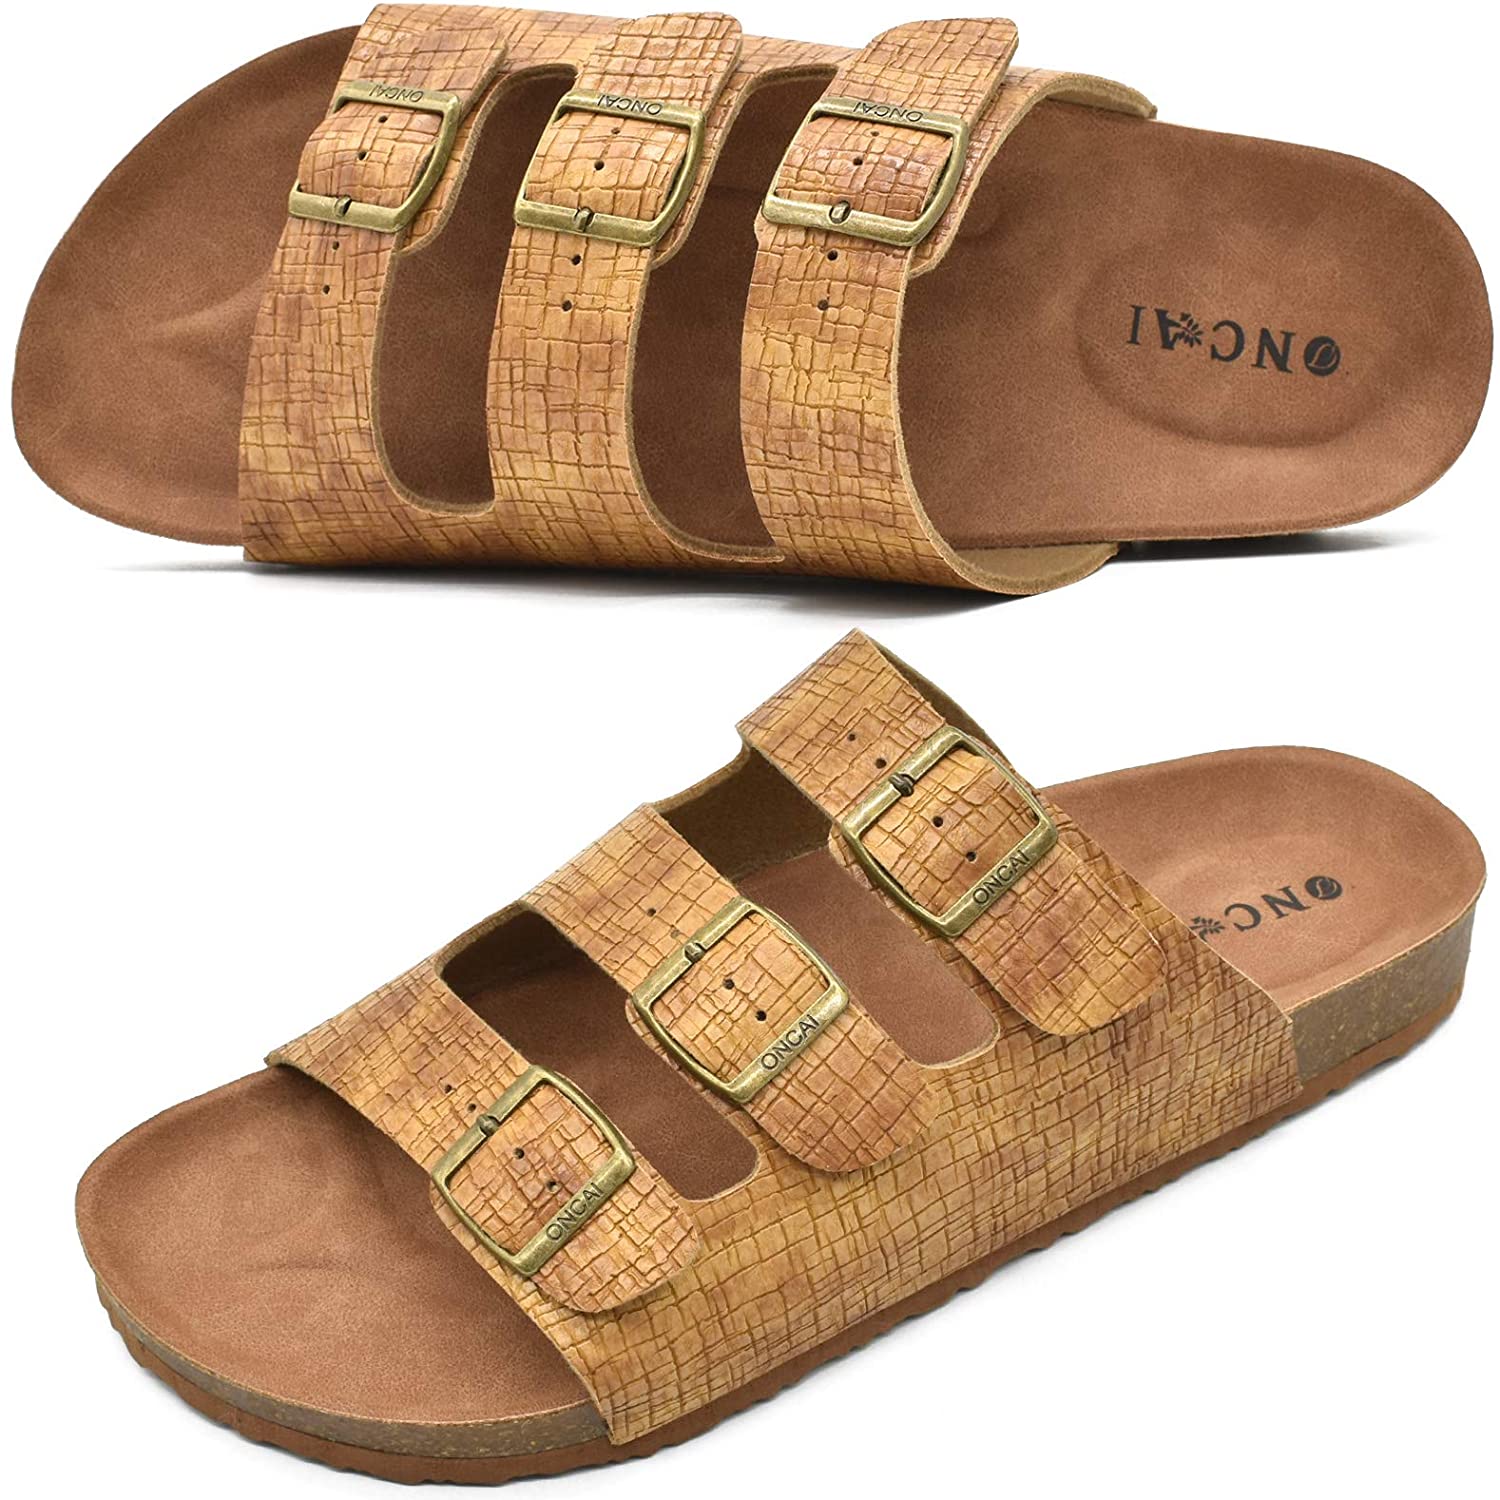 ONCAI Men's-Slide-Sandals-Beach-Slippers-Arizona Slippers Shoes Indoor and Outdoor Anti-skidding Flat Cork Sandals and Beach Slippers with Two Adjustable Straps 